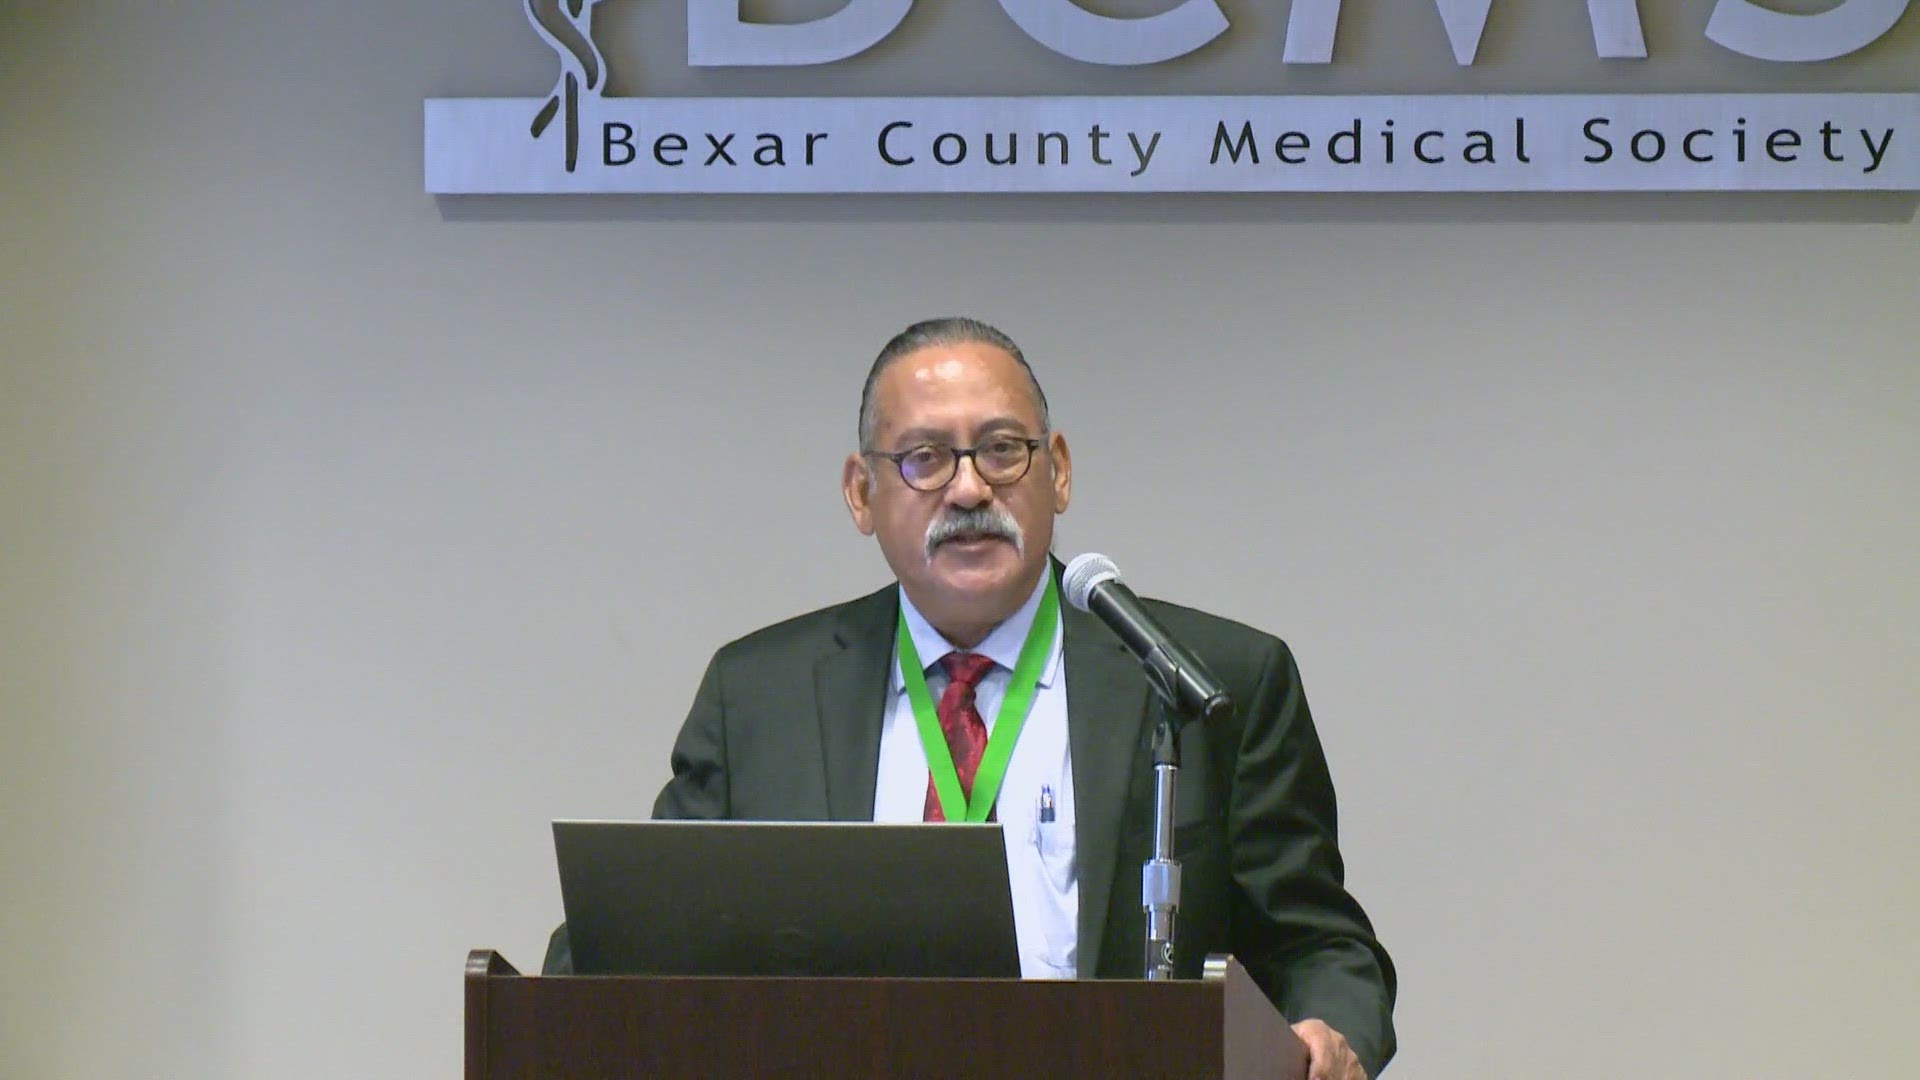 Established in September of 1853, BCMS is the oldest county medical society in Texas and the first to be organized under the State Medical Association of Texas.